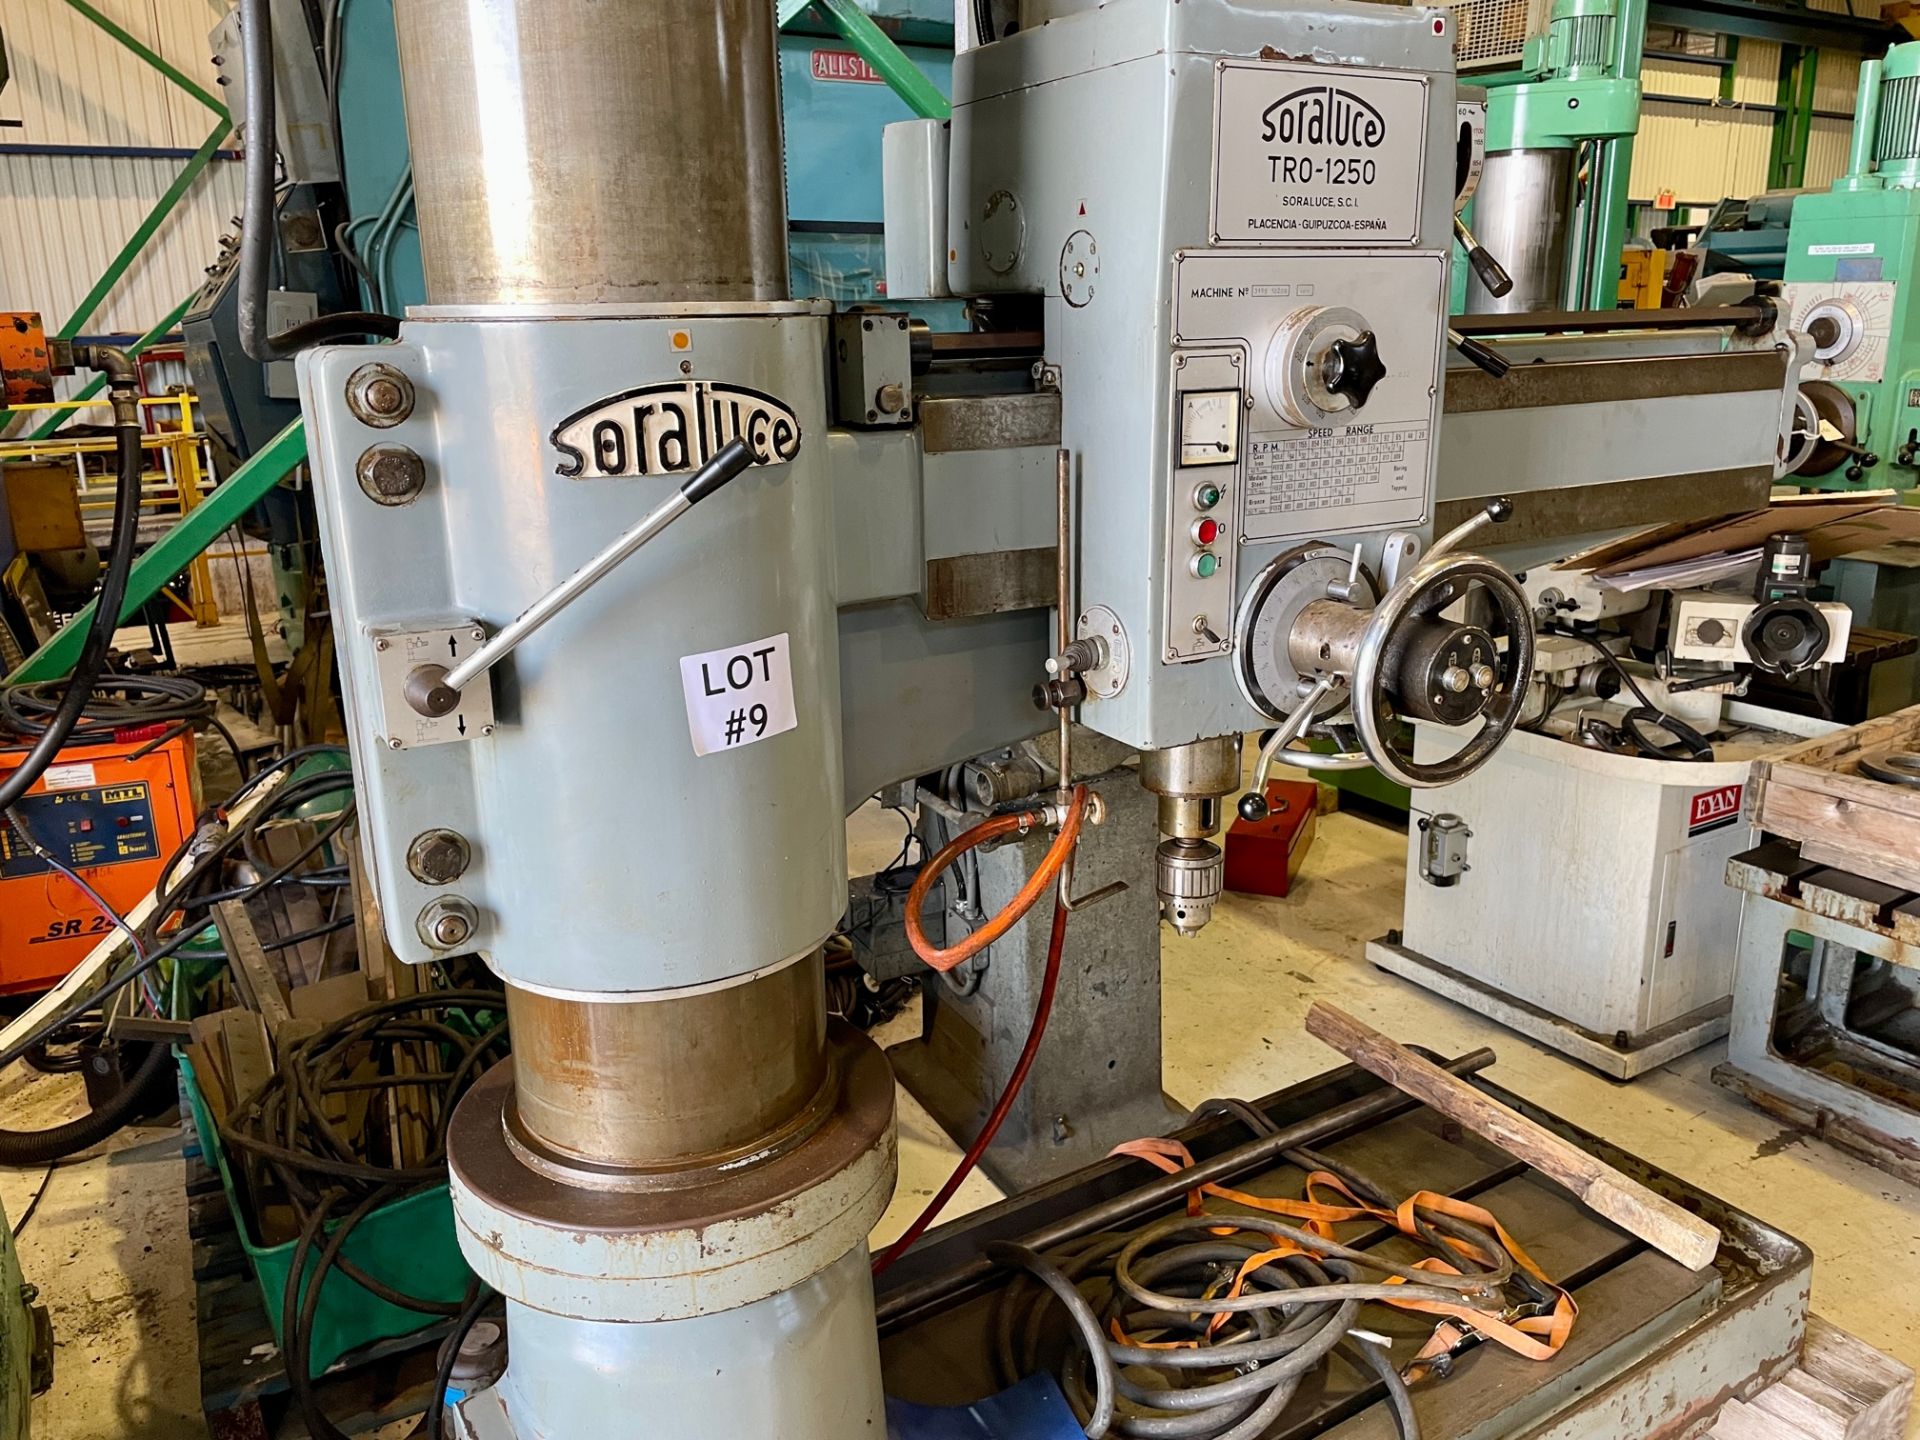 SORALUCE RADIAL DRILL, MDL TRO-1250-15030, S/N 3195 1028, 48'', LOCATION, MONTREAL, QUEBEC